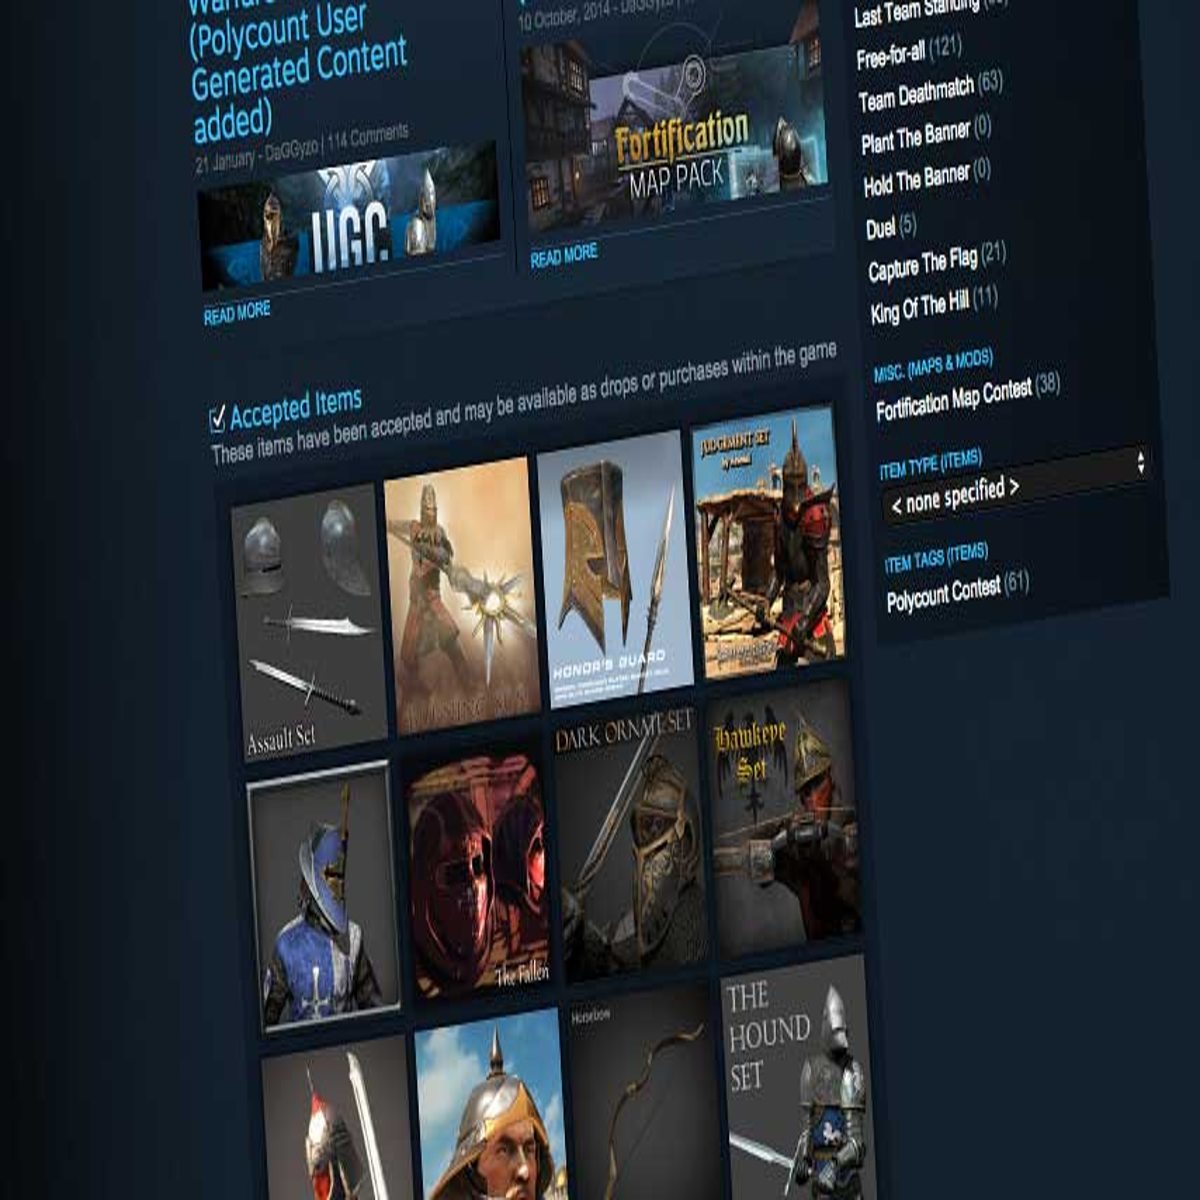 Tutorial - How to download Steam workshop mods without Owning The Game -  June 2023 